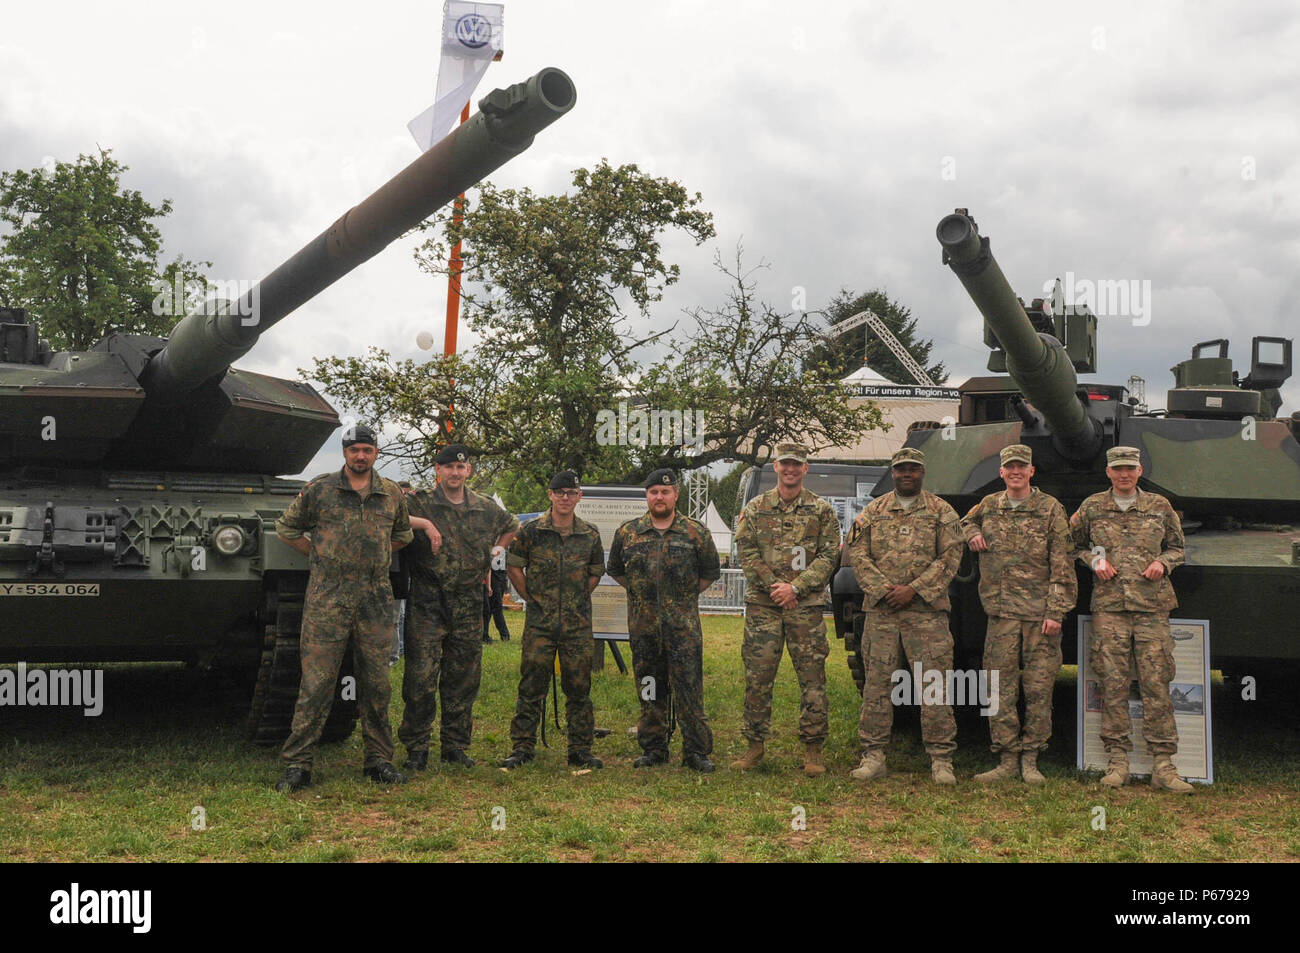 German soldiers assigned to Panzer Battalion 203 of Panzer Brigade 21, 1st Panzer Division and U.S. soldiers assigned to 2nd Battalion,7th Infantry Regiment, 1st Armored Brigade Combat Team, 3rd Infantry Division pose in front of the German Leopard II A6 tank and the American M1A2 Abrams Main Battle Tank at Hessentag ‘16 in Herborn, Germany on May 21, 2016. The Hessian Day or ‘Hessentag’ is an annual festival that showcases culture, traditions, businesses and the citizenry of the German state. (Photo by Sgt. 1st Class Jason Epperson, 4th ID Public Affairs) Stock Photo